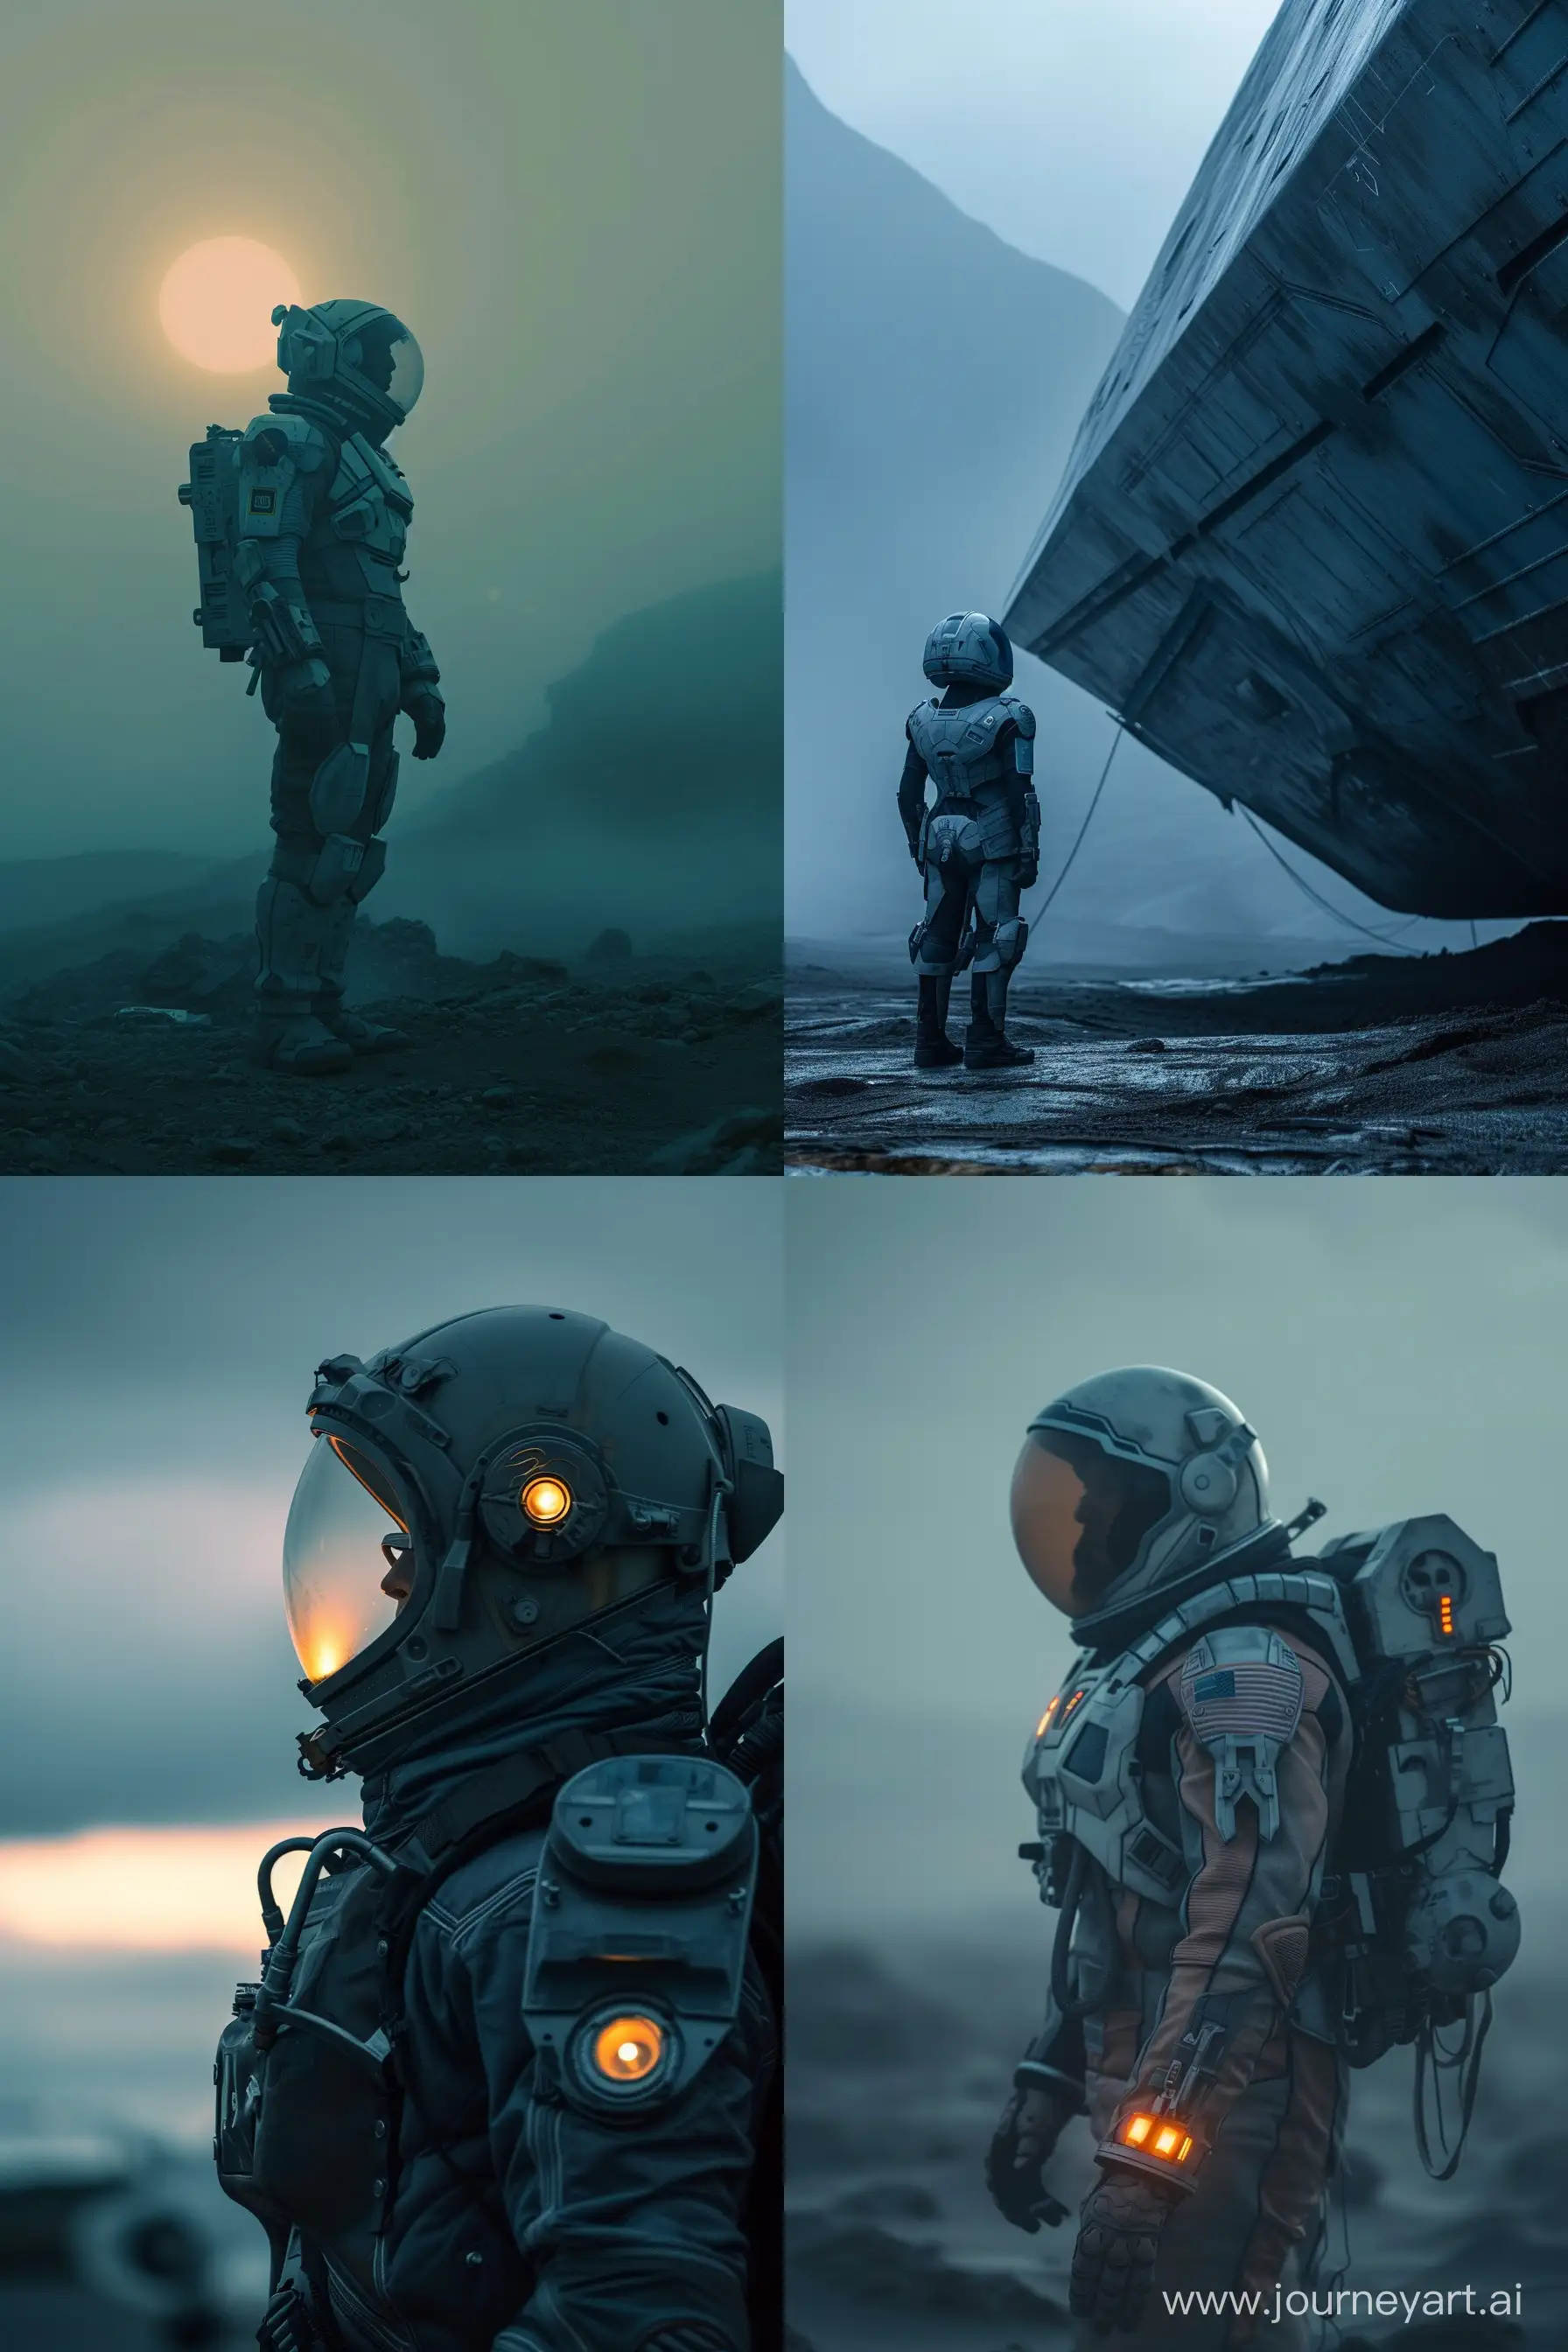 Minimalist movie still, man in a huge futuristic minimalist suit, grey blue, warm light, spacecraft::3 Minimalist wide angle movie still, man in a futuristic suit, spacecraft, NYC, mountains, north nature, Scotland nature, muted tones, warm light, cold colors, low contrast, neon, foggy::1 --ar 2:3 --v 6.0 --style raw